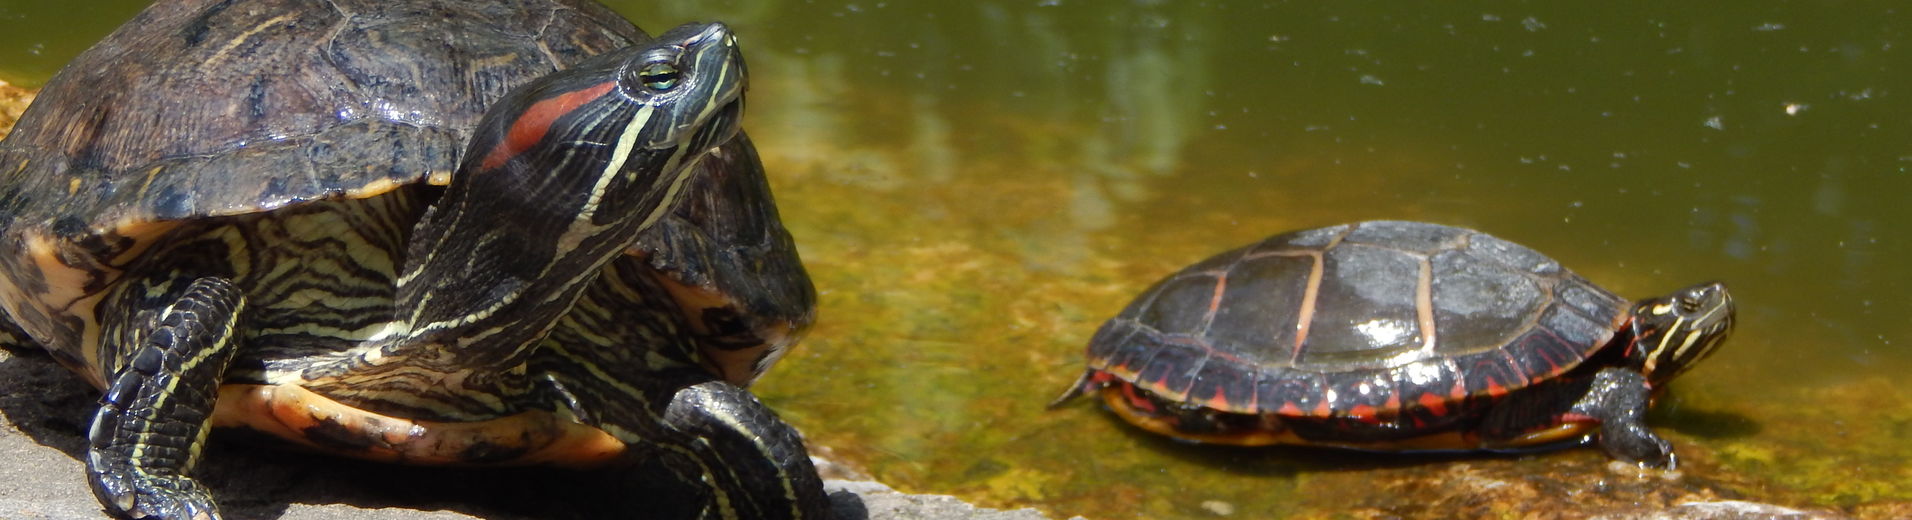 turtles laying in shallow water